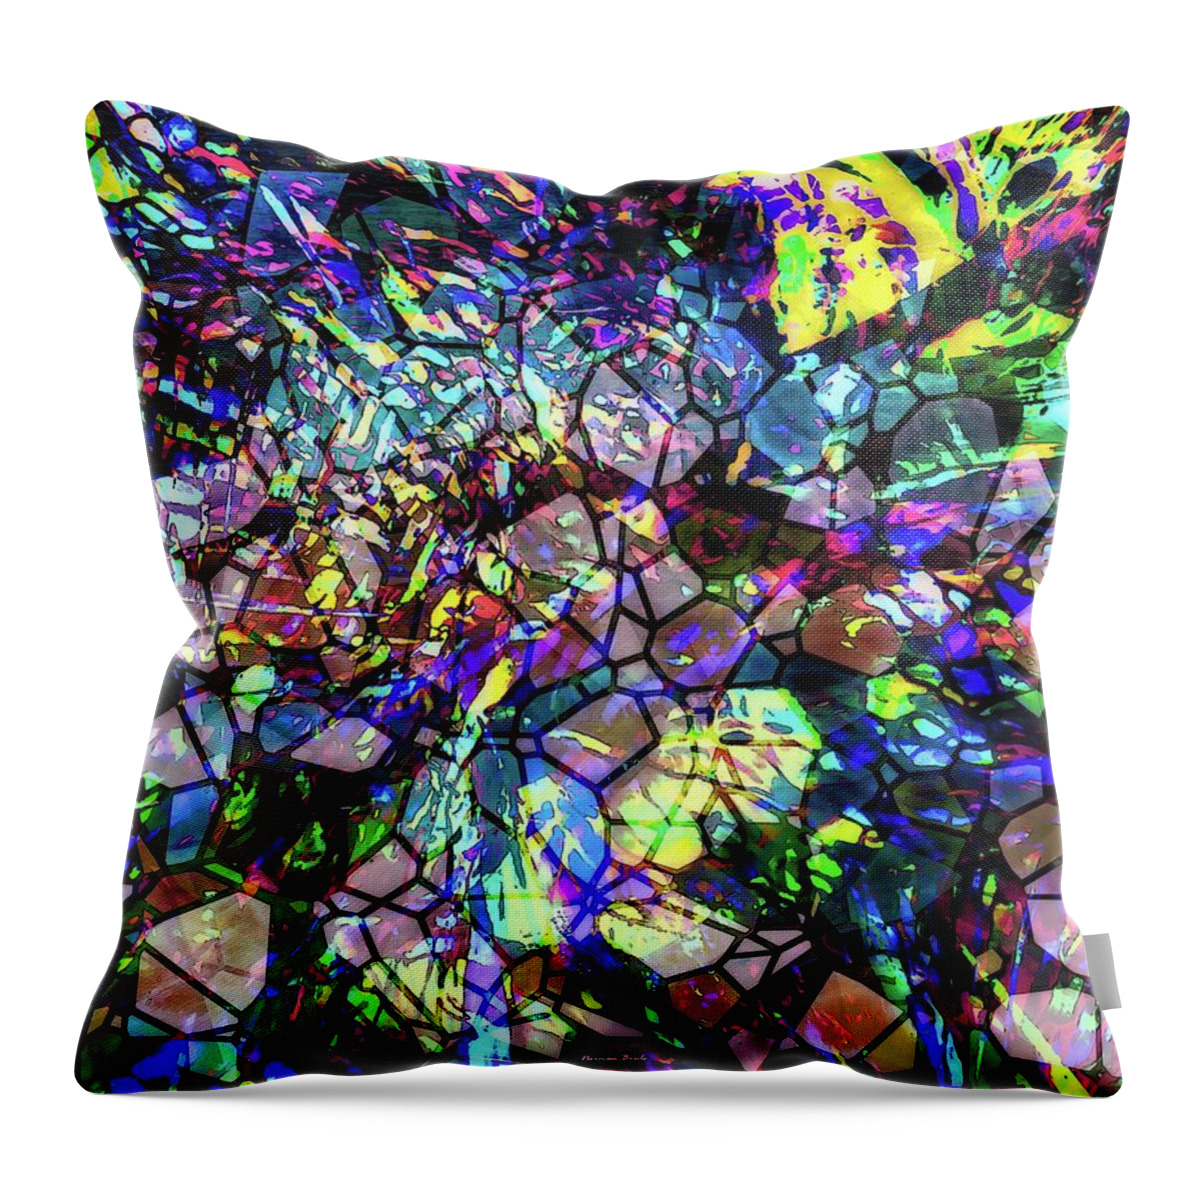 Abstract Art Throw Pillow featuring the digital art The Lobby by Norman Brule